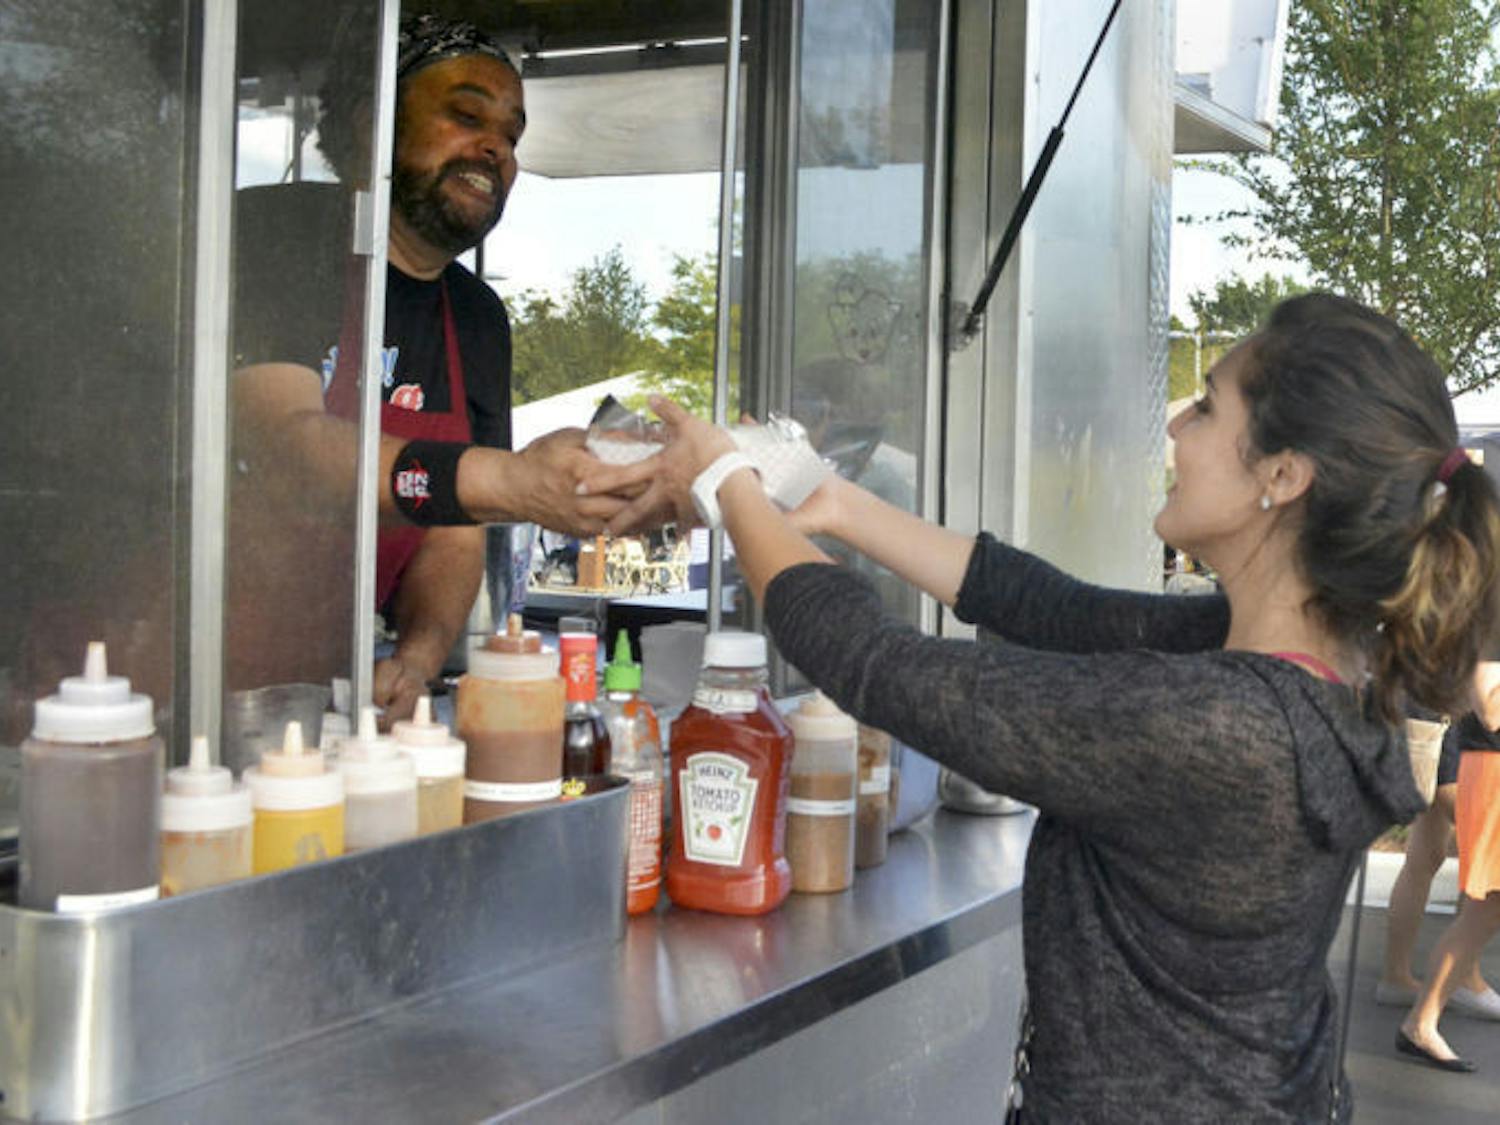 Natalia Rivera, 19, receives food from Nigel Hamm, owner and operator of Go Go Stuff Yourself/ Mobile Kitchen and Catering, at the food truck rally at Innovation Square on Friday.